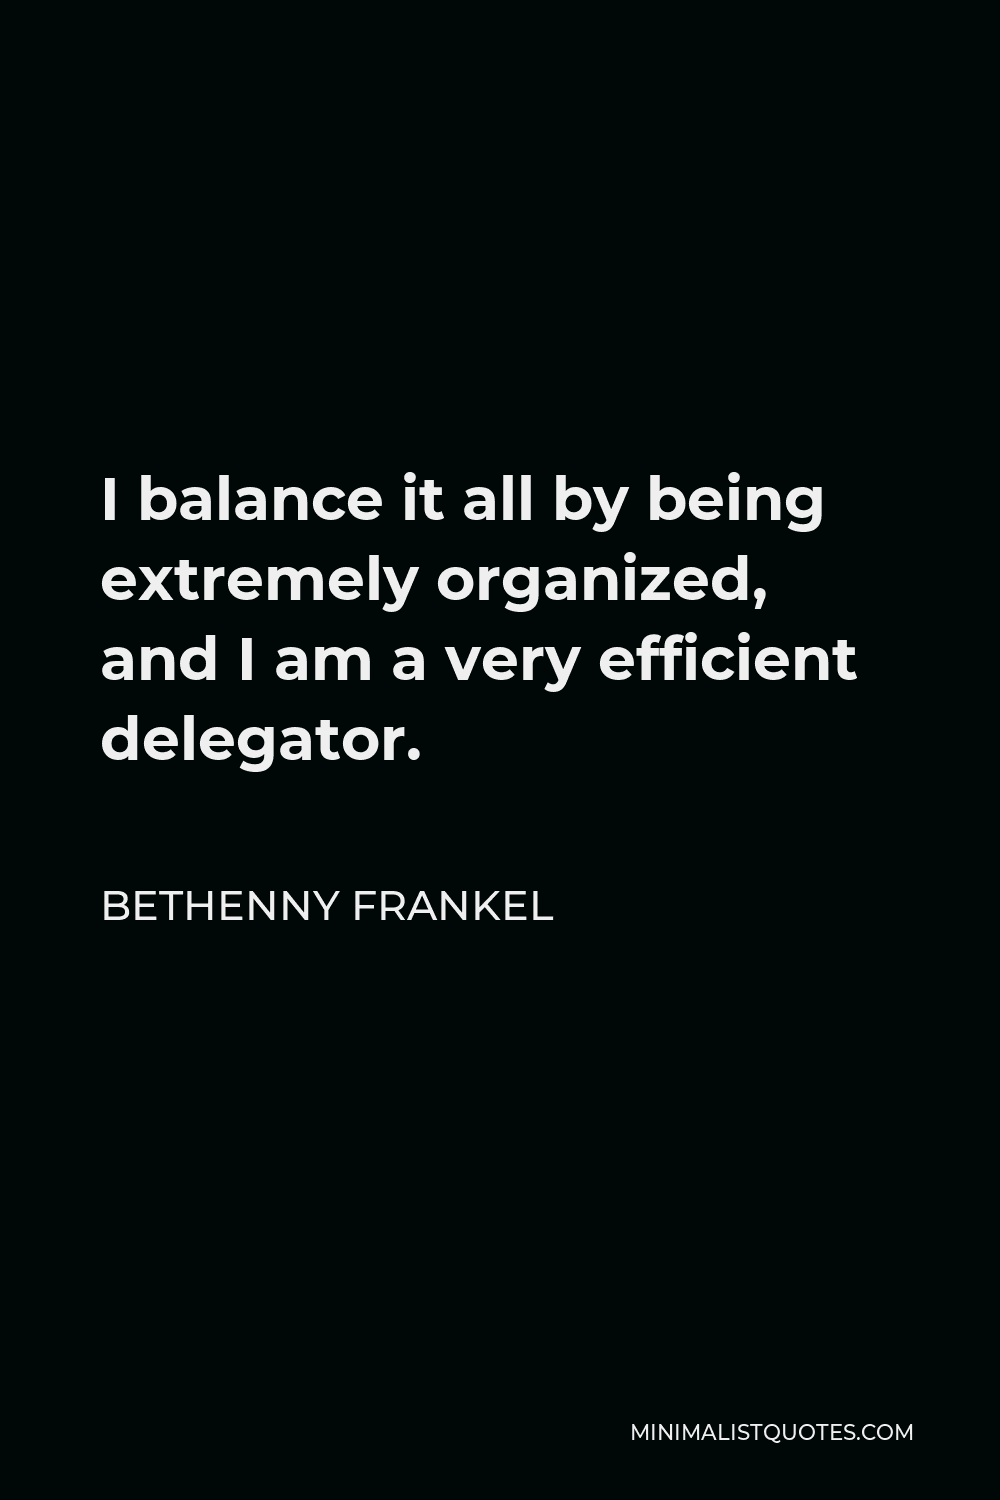 Bethenny Frankel Quote - I balance it all by being extremely organized, and I am a very efficient delegator.